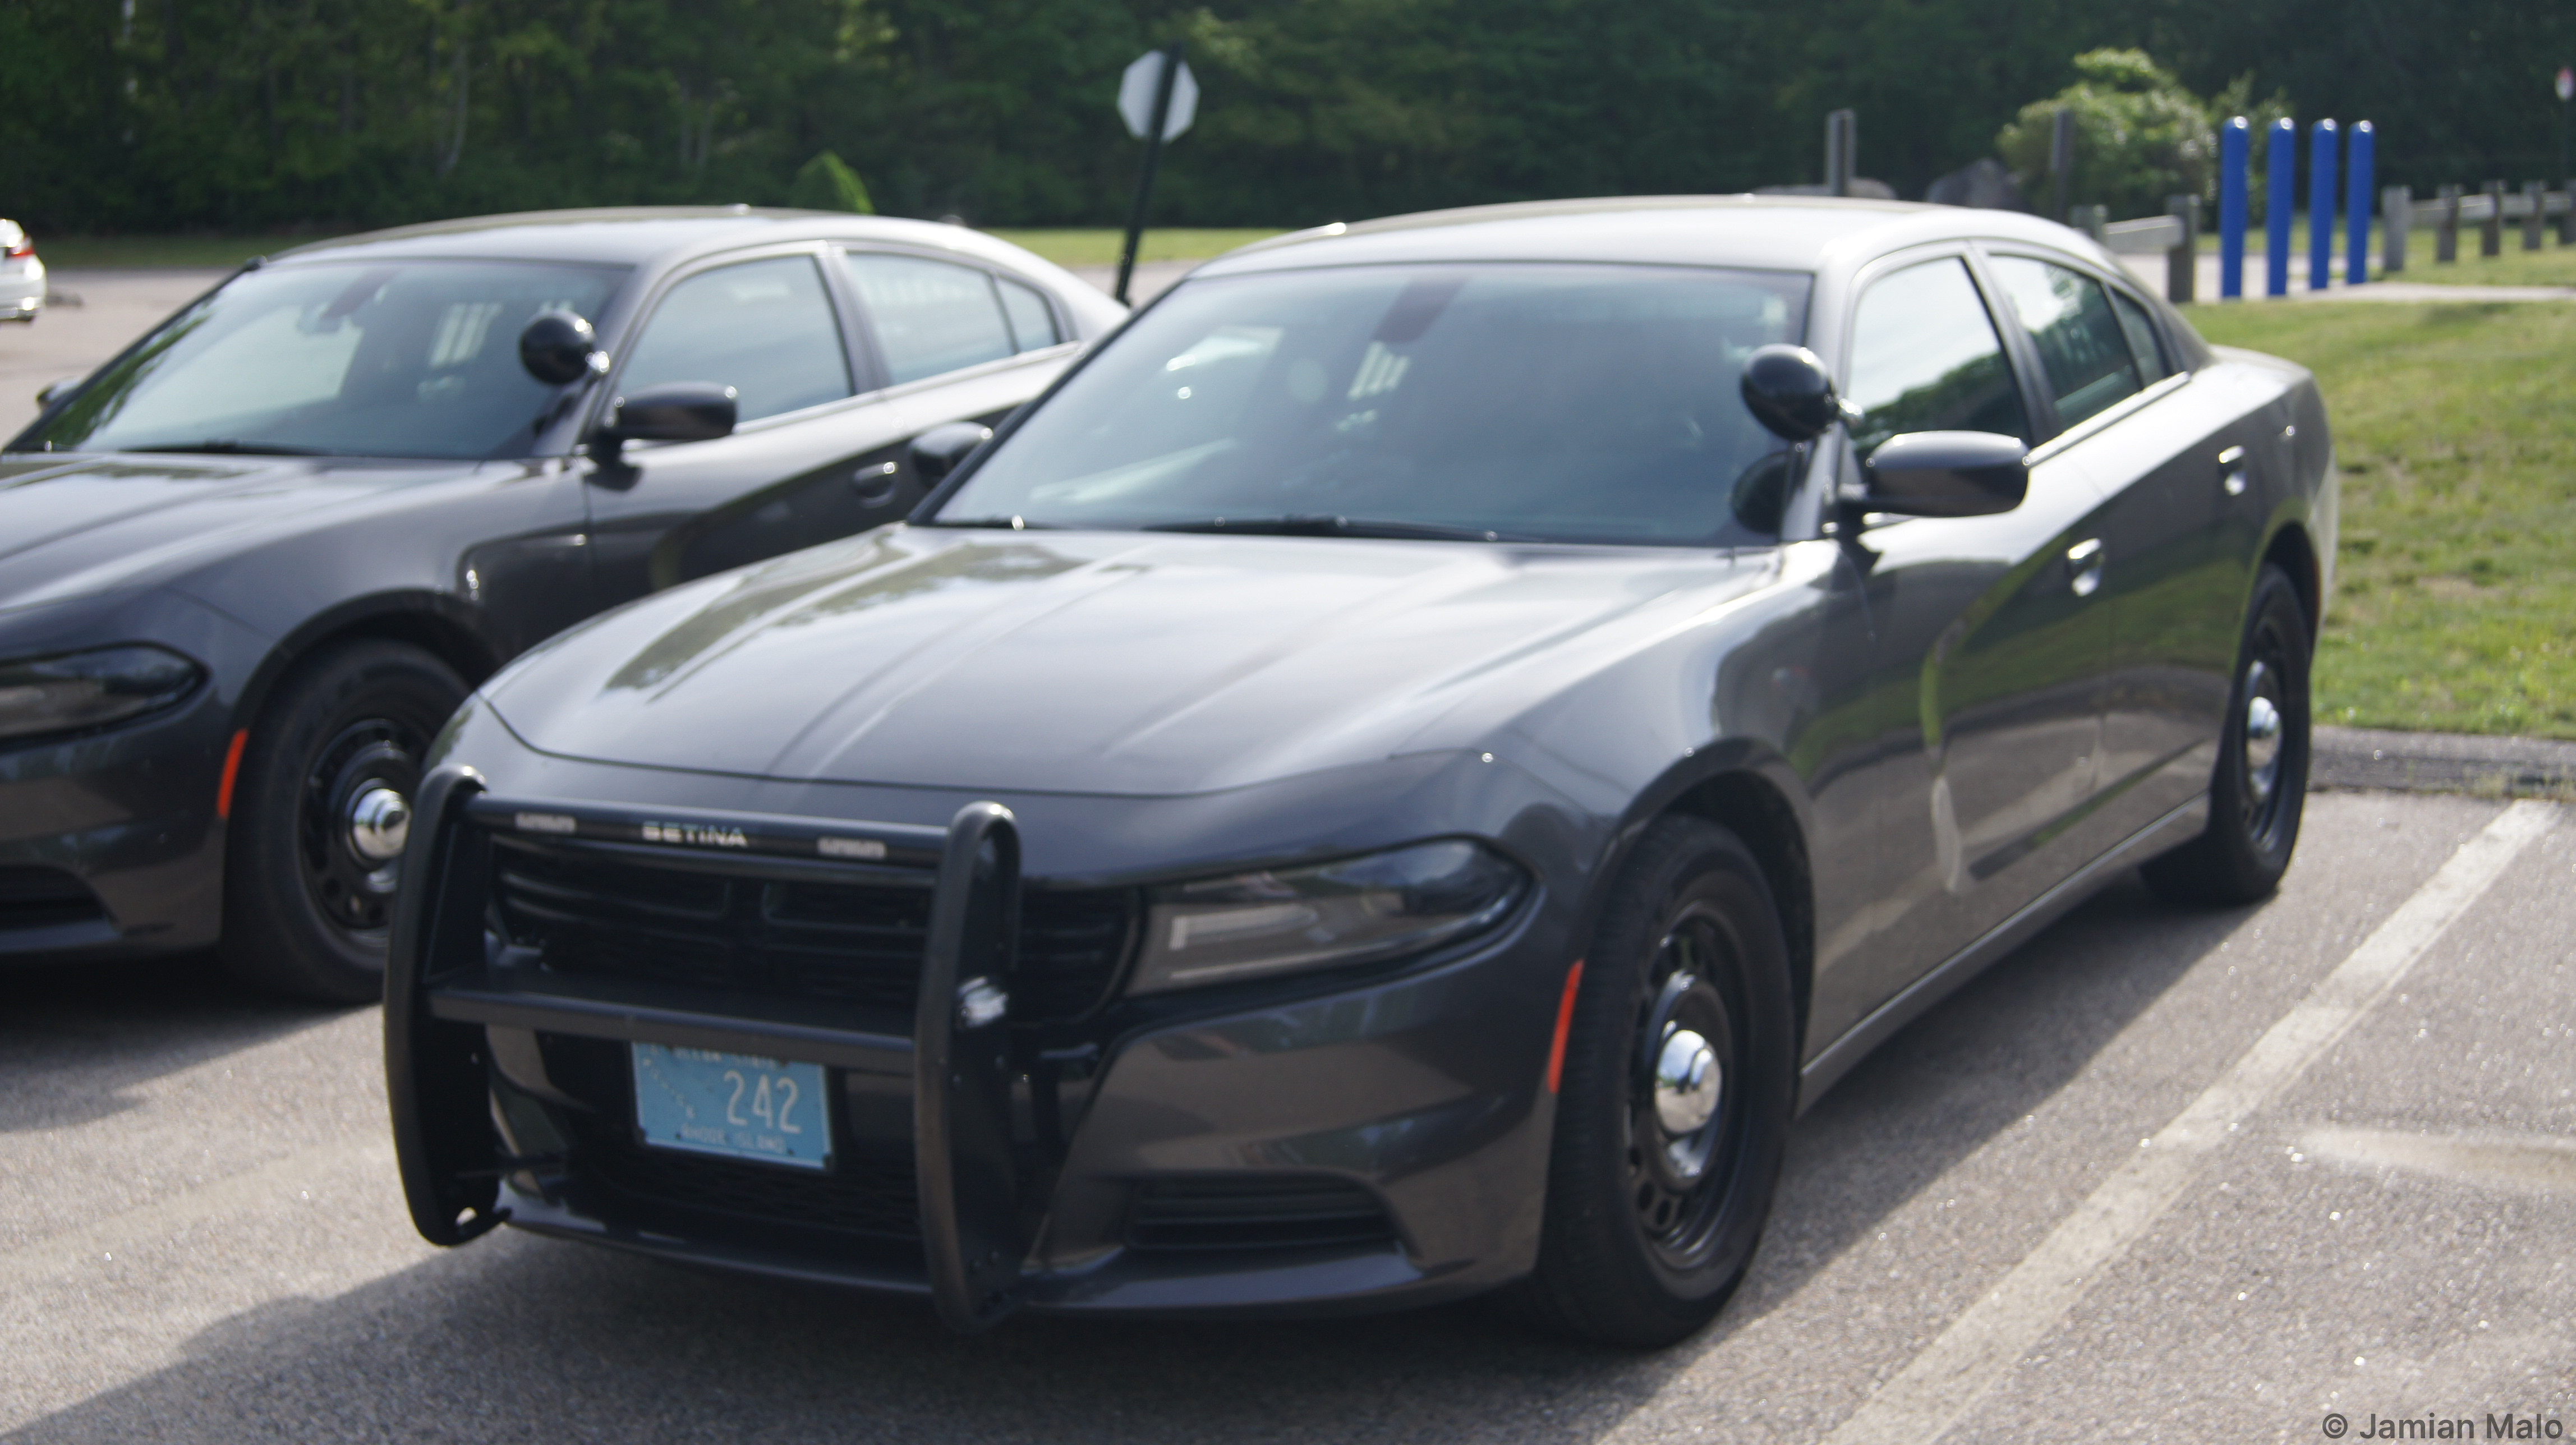 A photo  of Hopkinton Police
            Cruiser 242, a 2020 Dodge Charger             taken by Jamian Malo